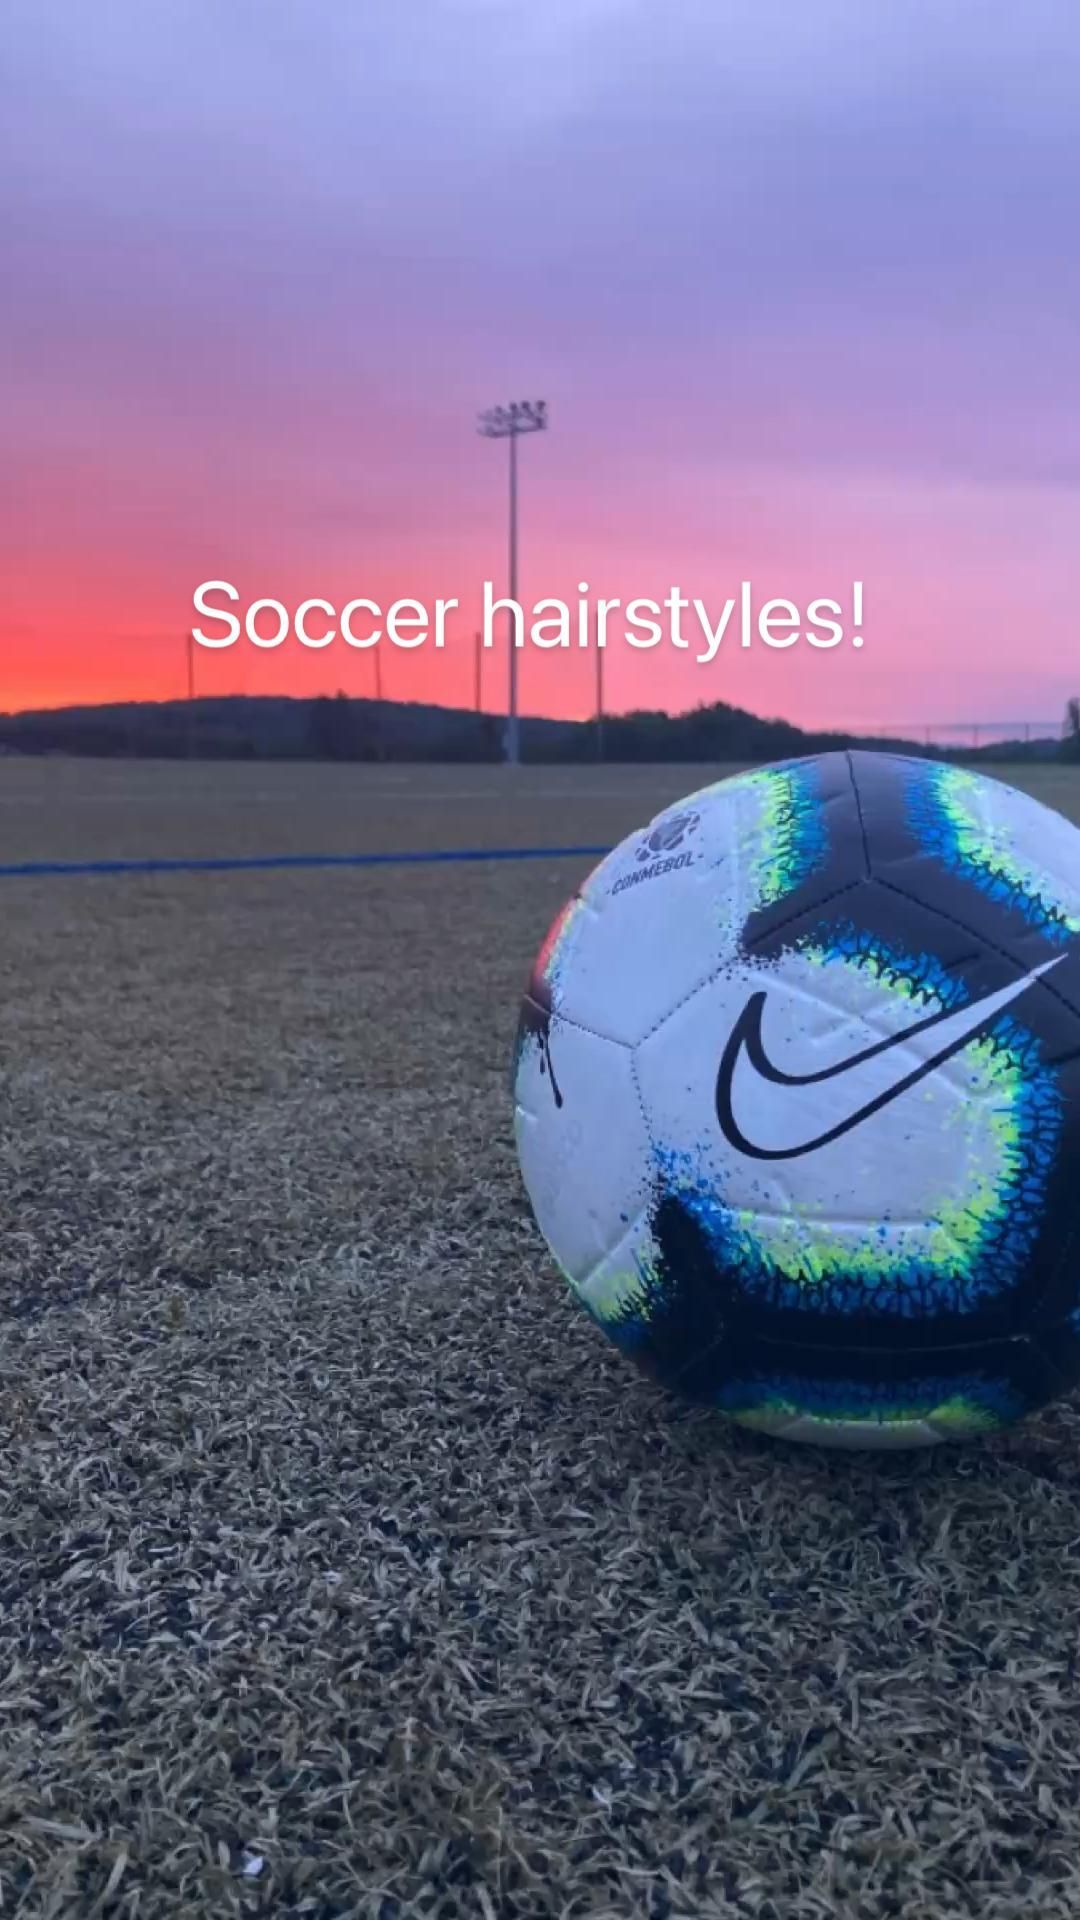 Soccer hairstyles!. Soccer picture, Soccer background, Soccer photography